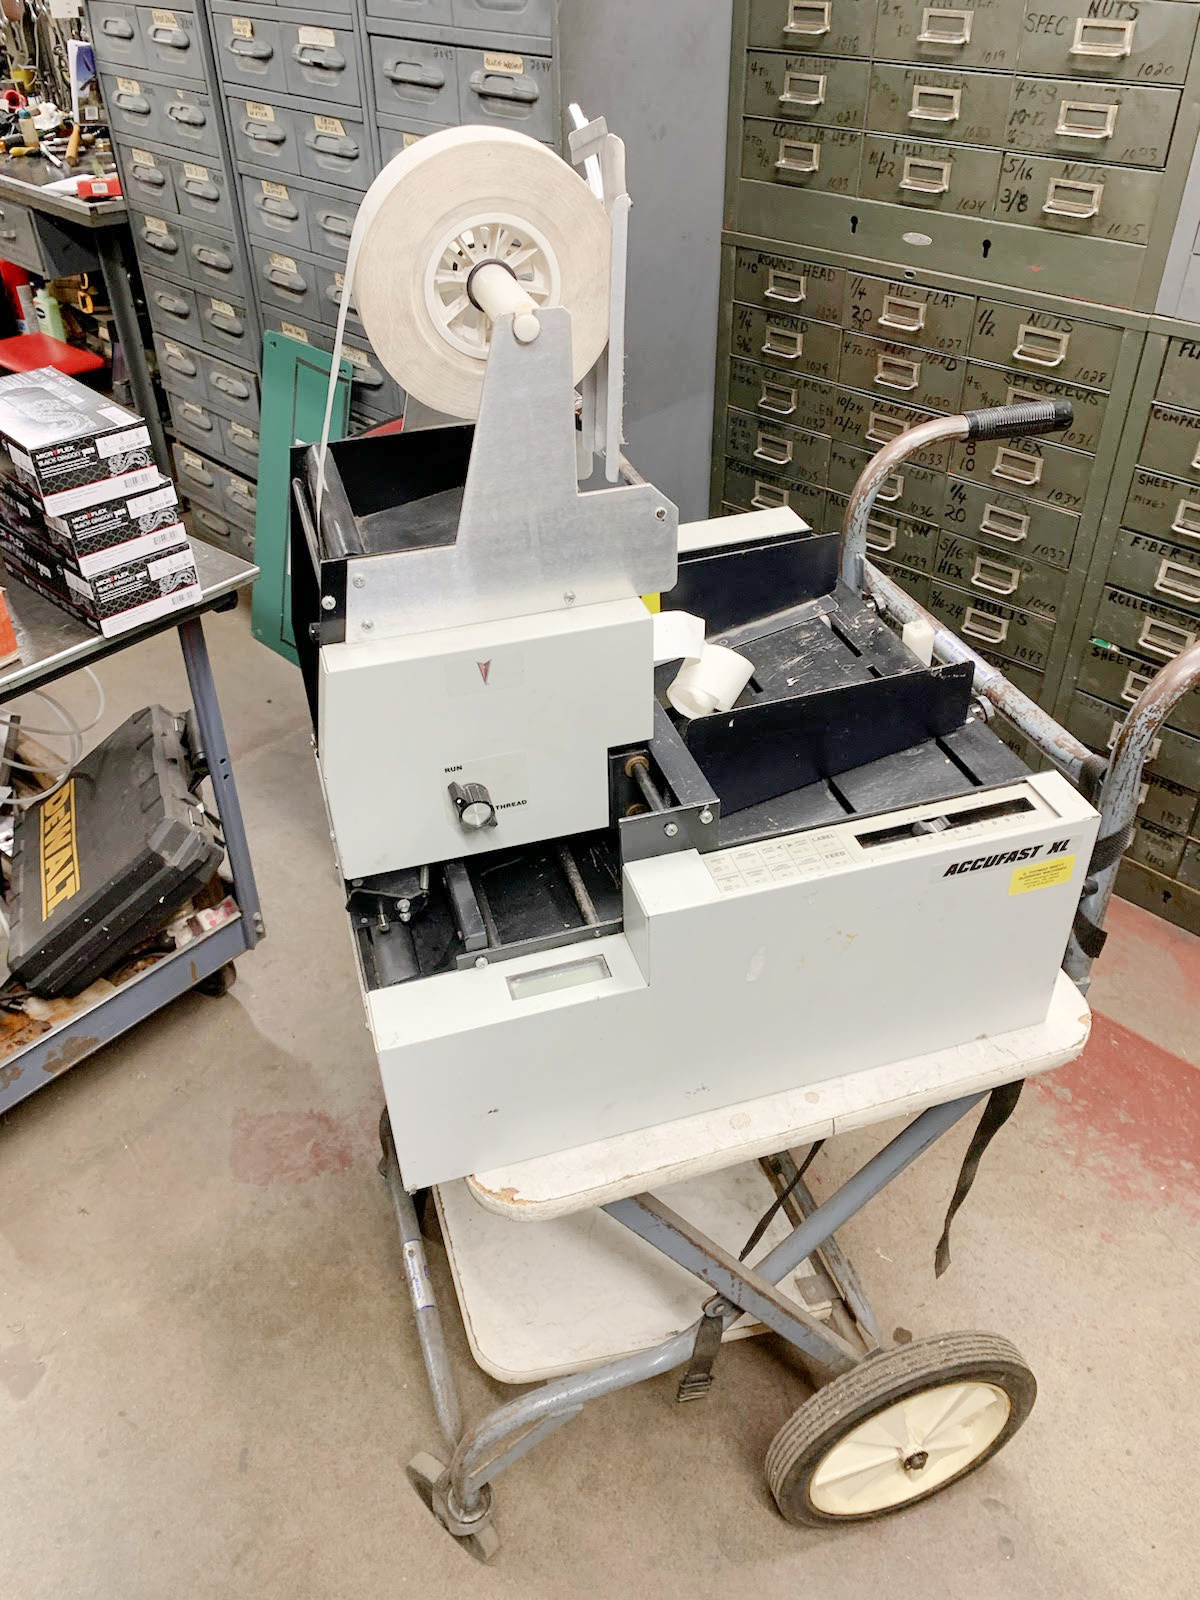 Equipment Lot: Accufast XL Labeler with Stamp Affixer & Accufast KT with FX (Refurbished) (Used) Item # UE-011122A (New Hampshire)